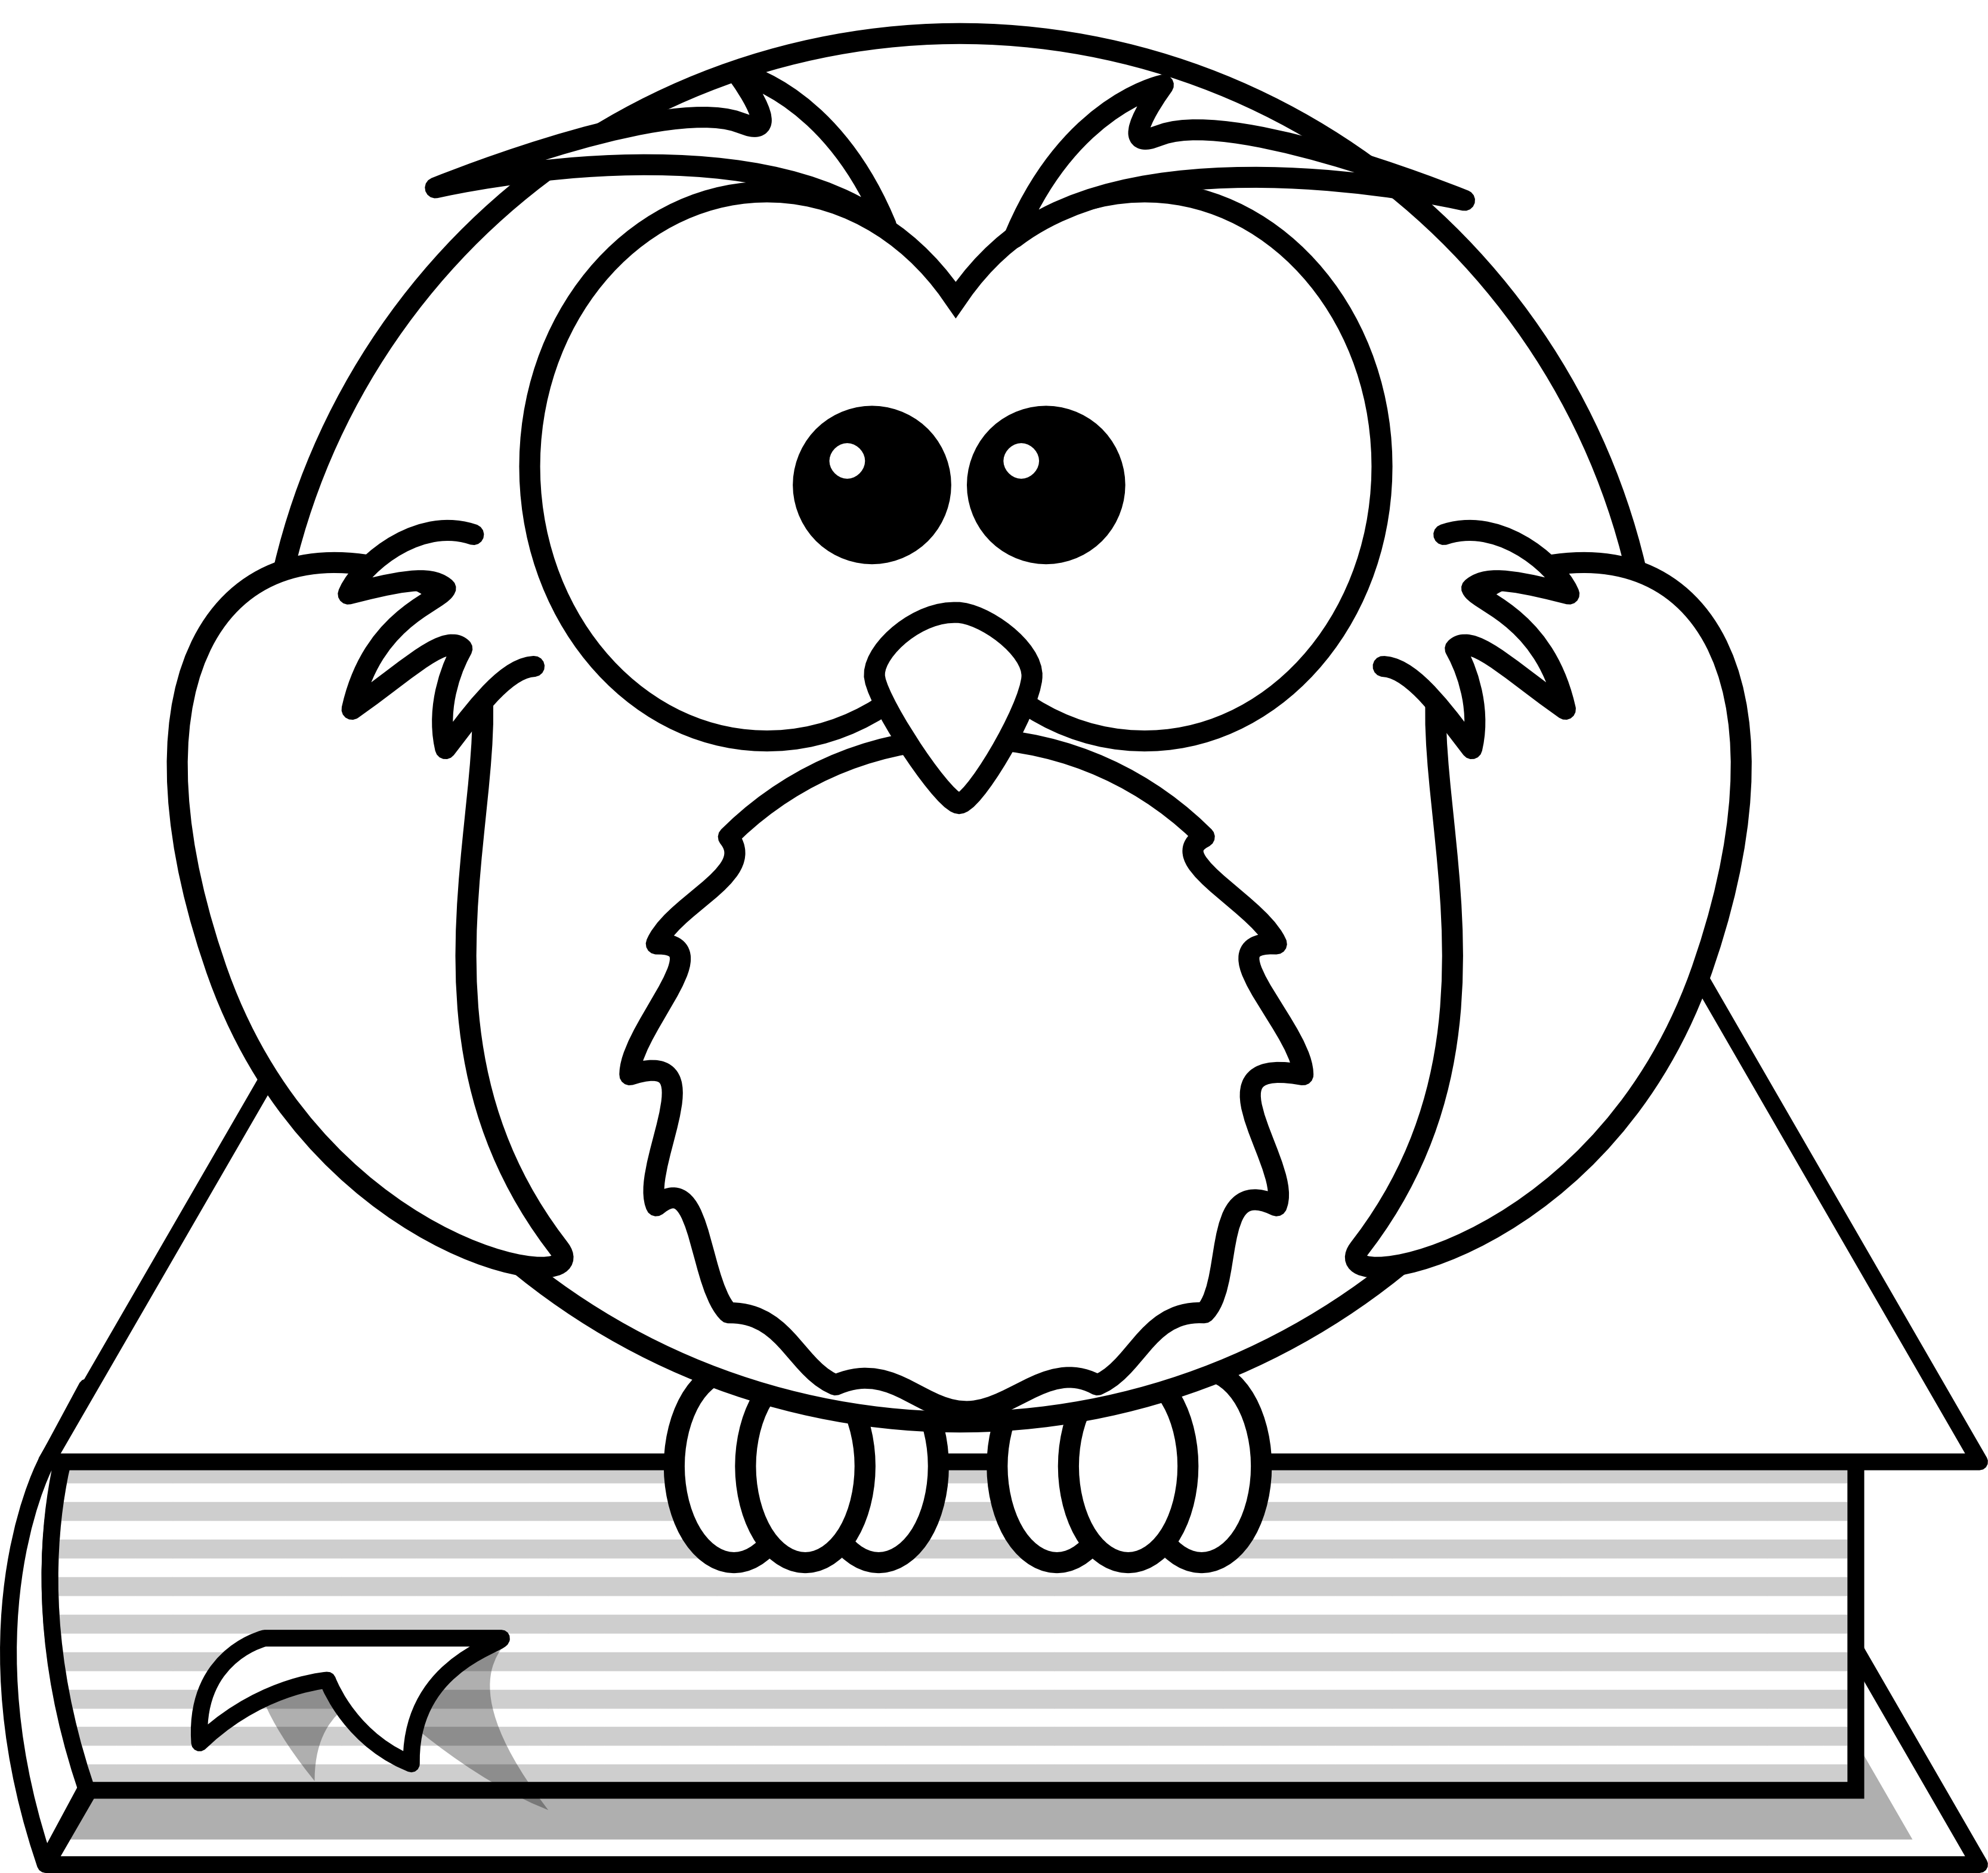 Cartoon Owl Pictures Black And White Images & Pictures - Becuo